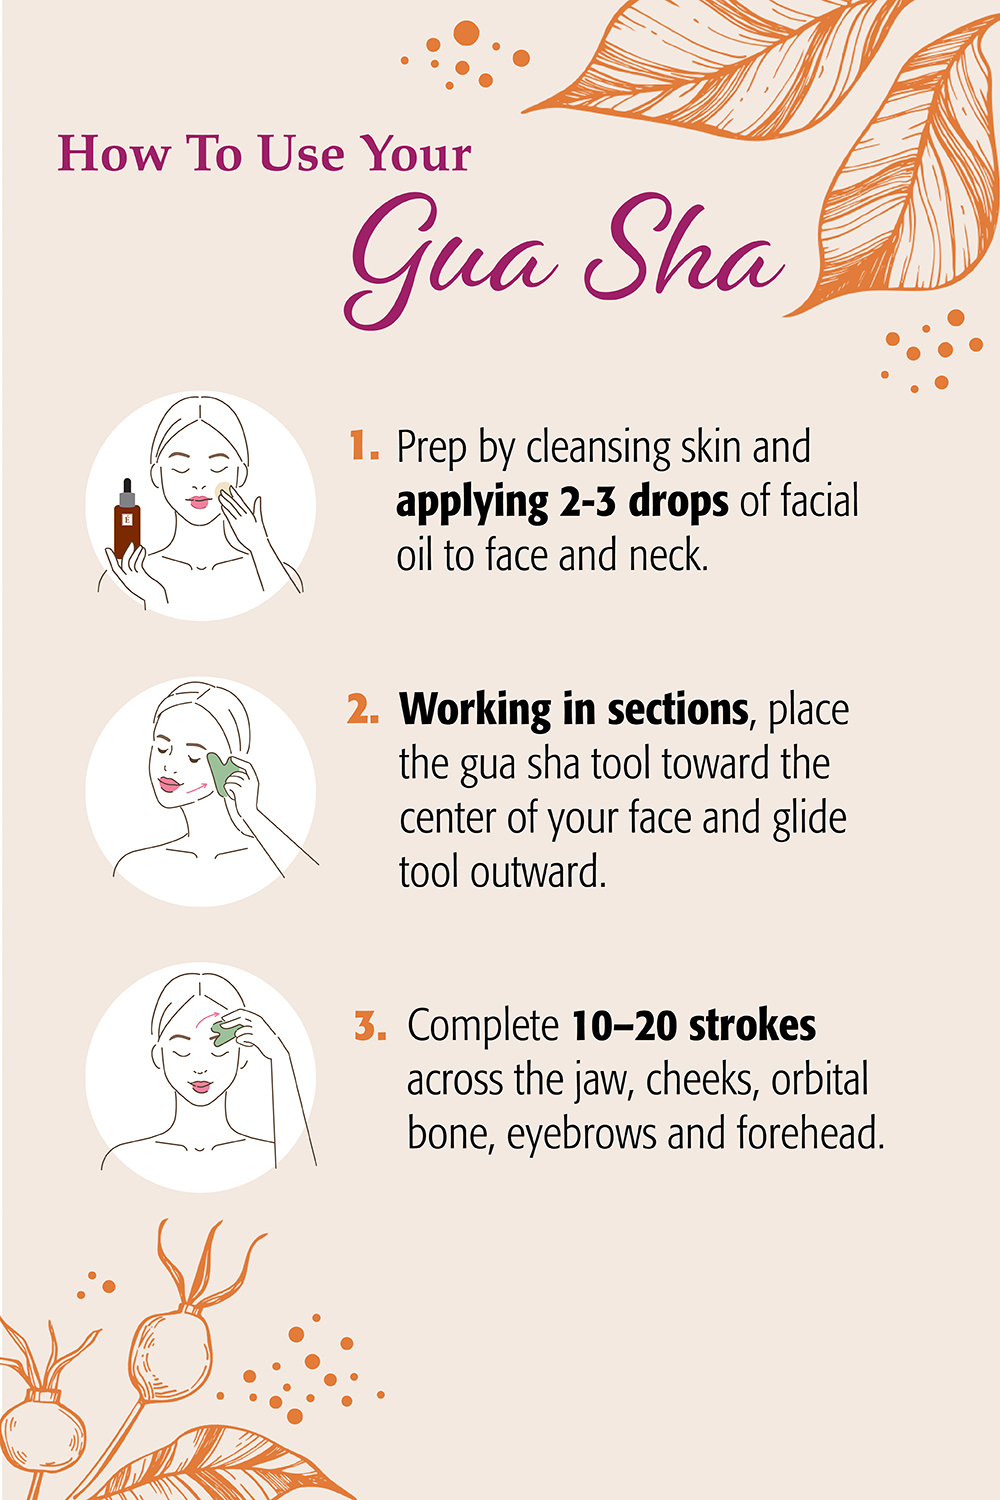 How to use your gua sha